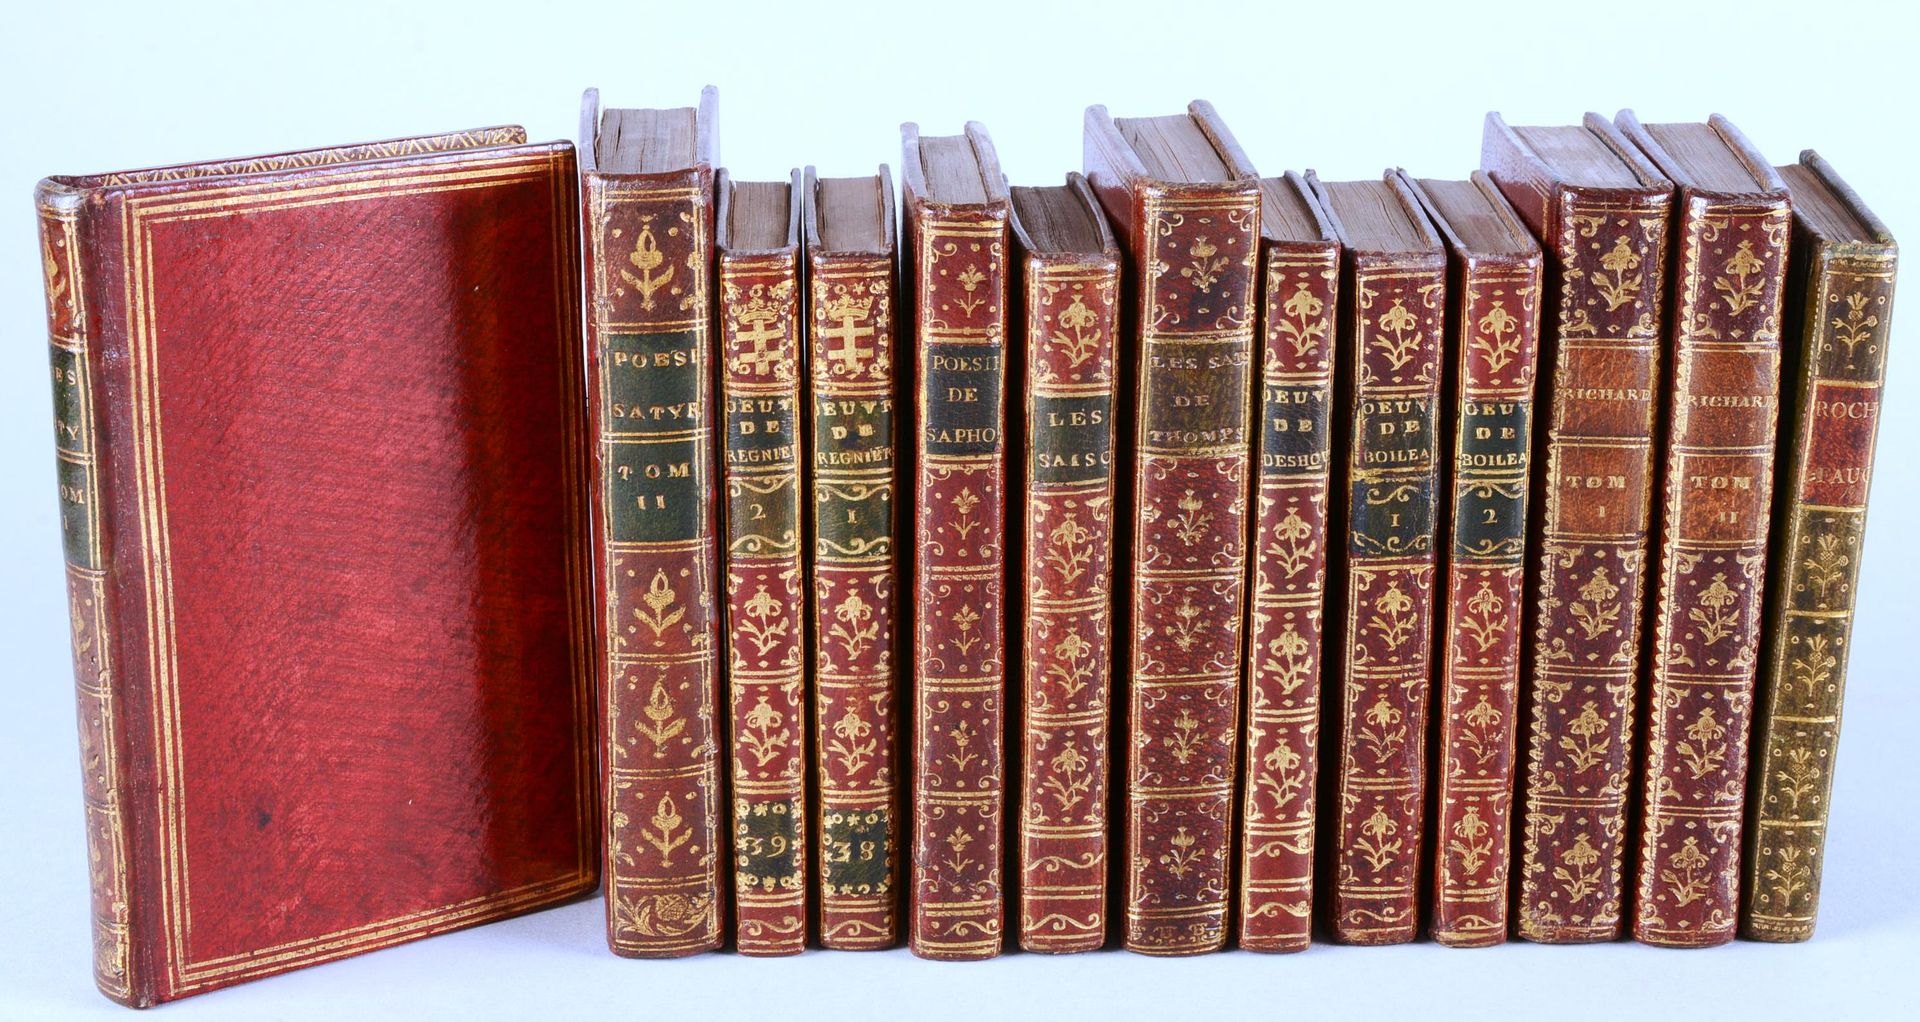 [CAZIN] [CAZIN]



Set of 9 works in 13 vols. 



 In-16° and in-18°. Full conte&hellip;